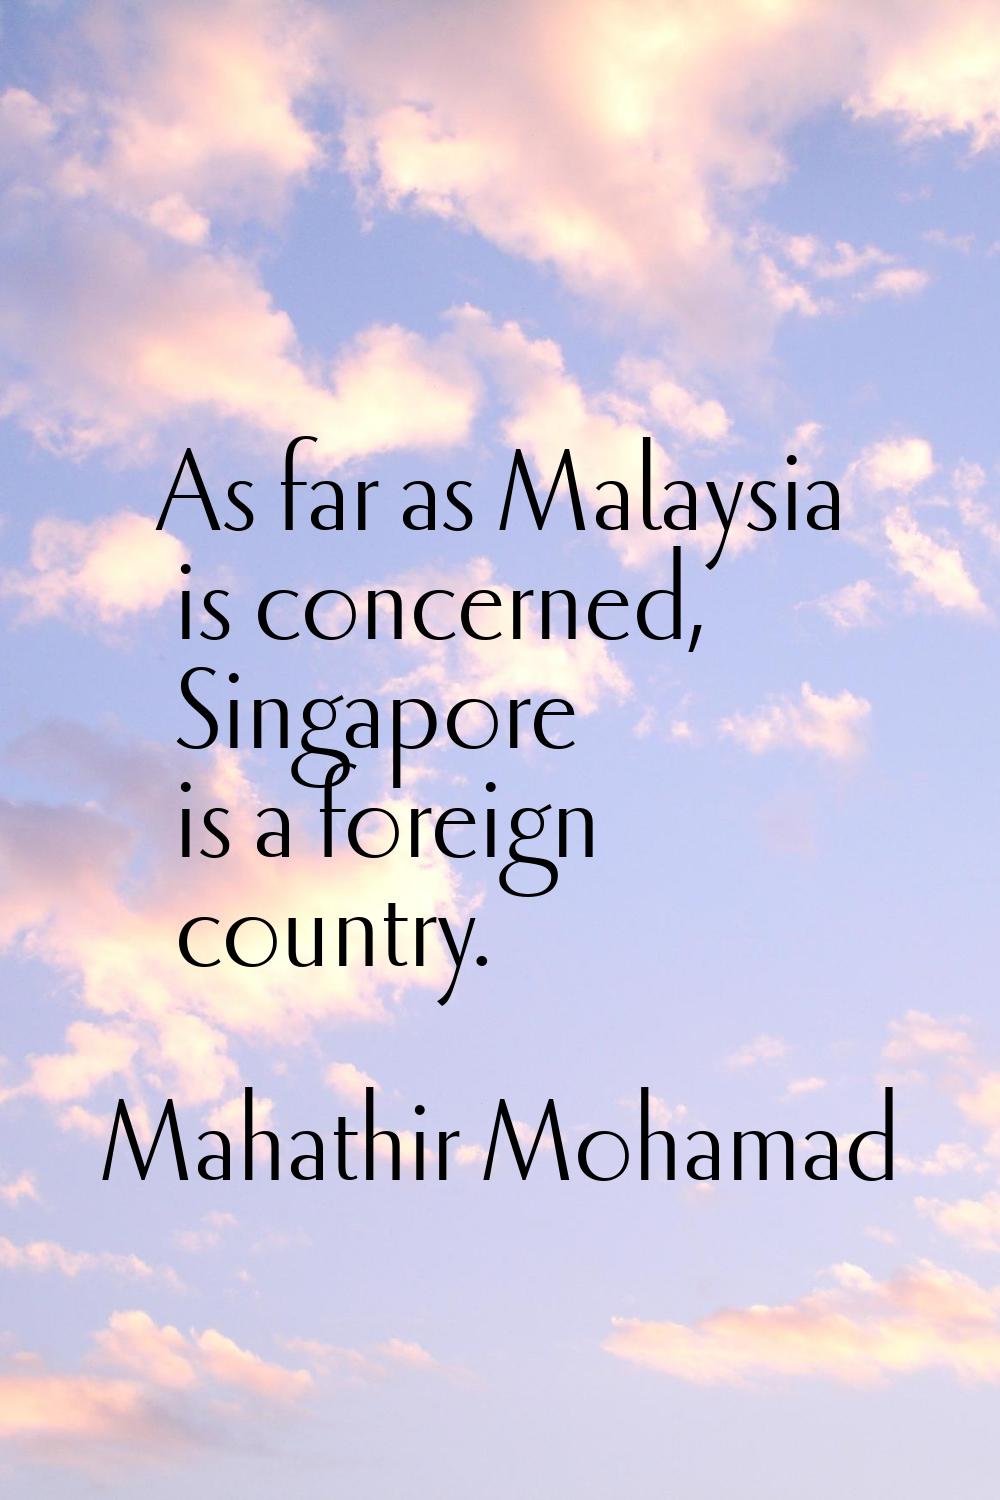 As far as Malaysia is concerned, Singapore is a foreign country.